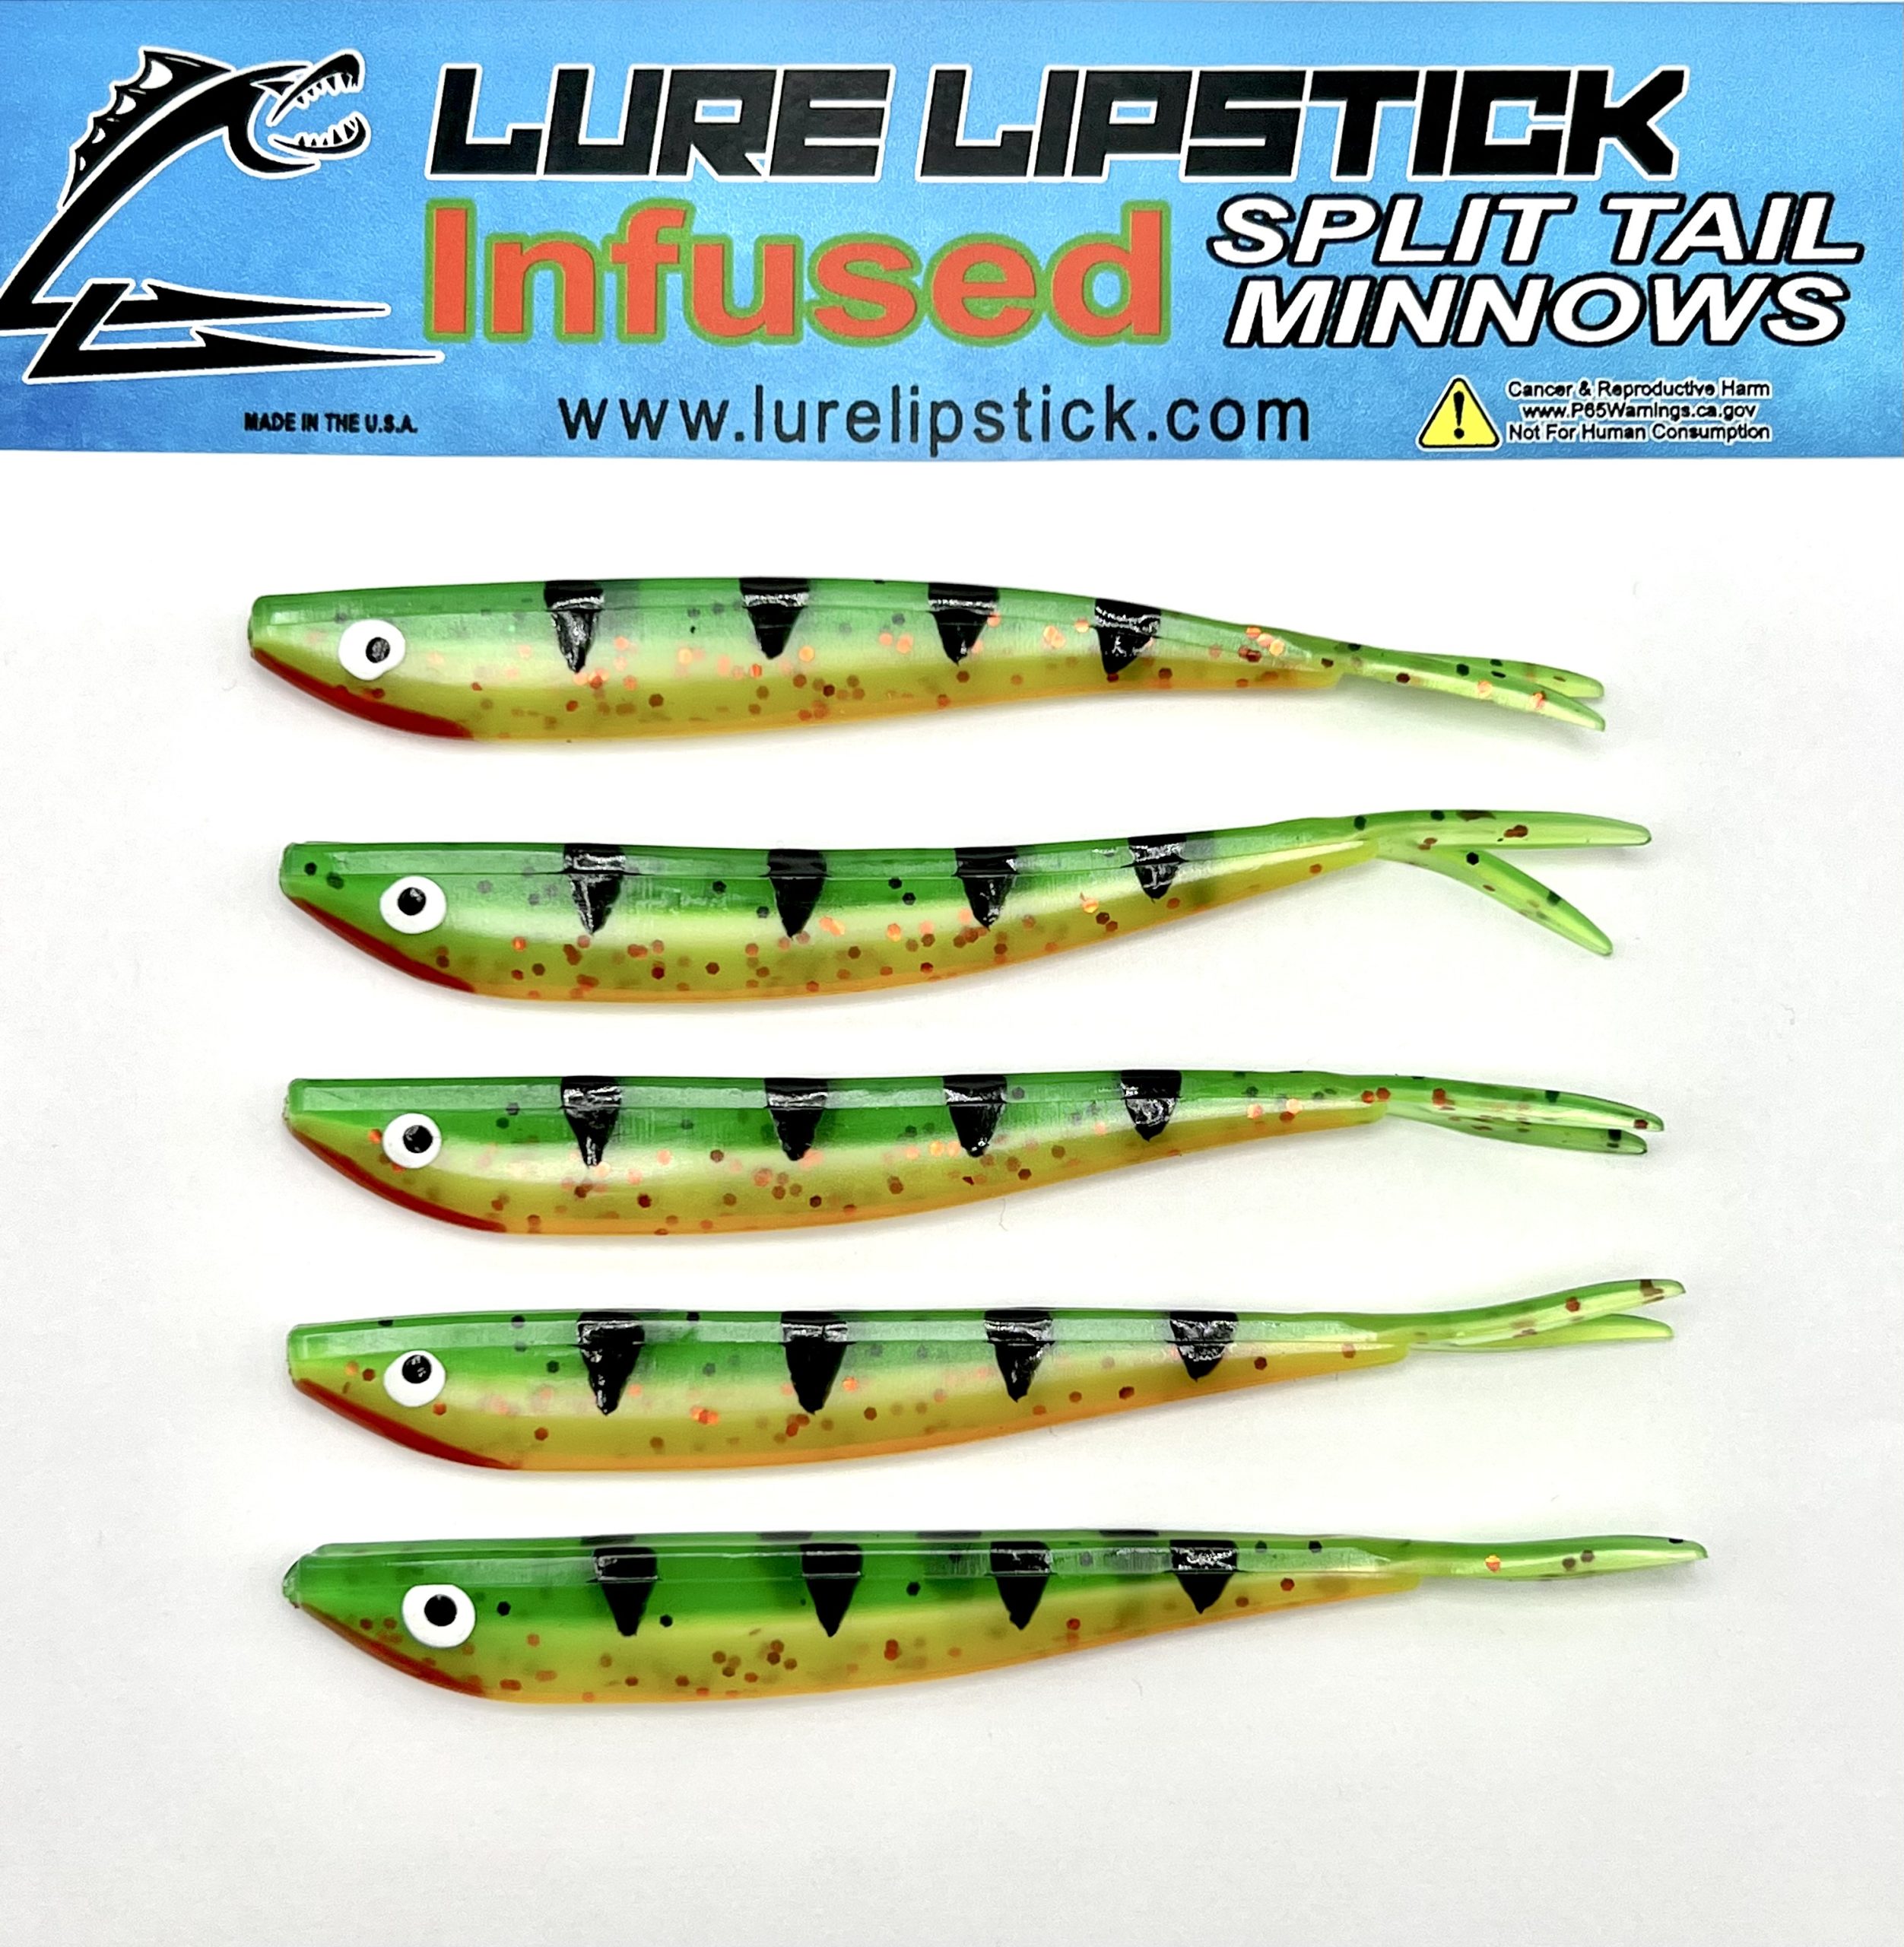 4 IN 5 PACK CUSTOM INFUSED SPLIT TAIL MINNOWS - RICHIE